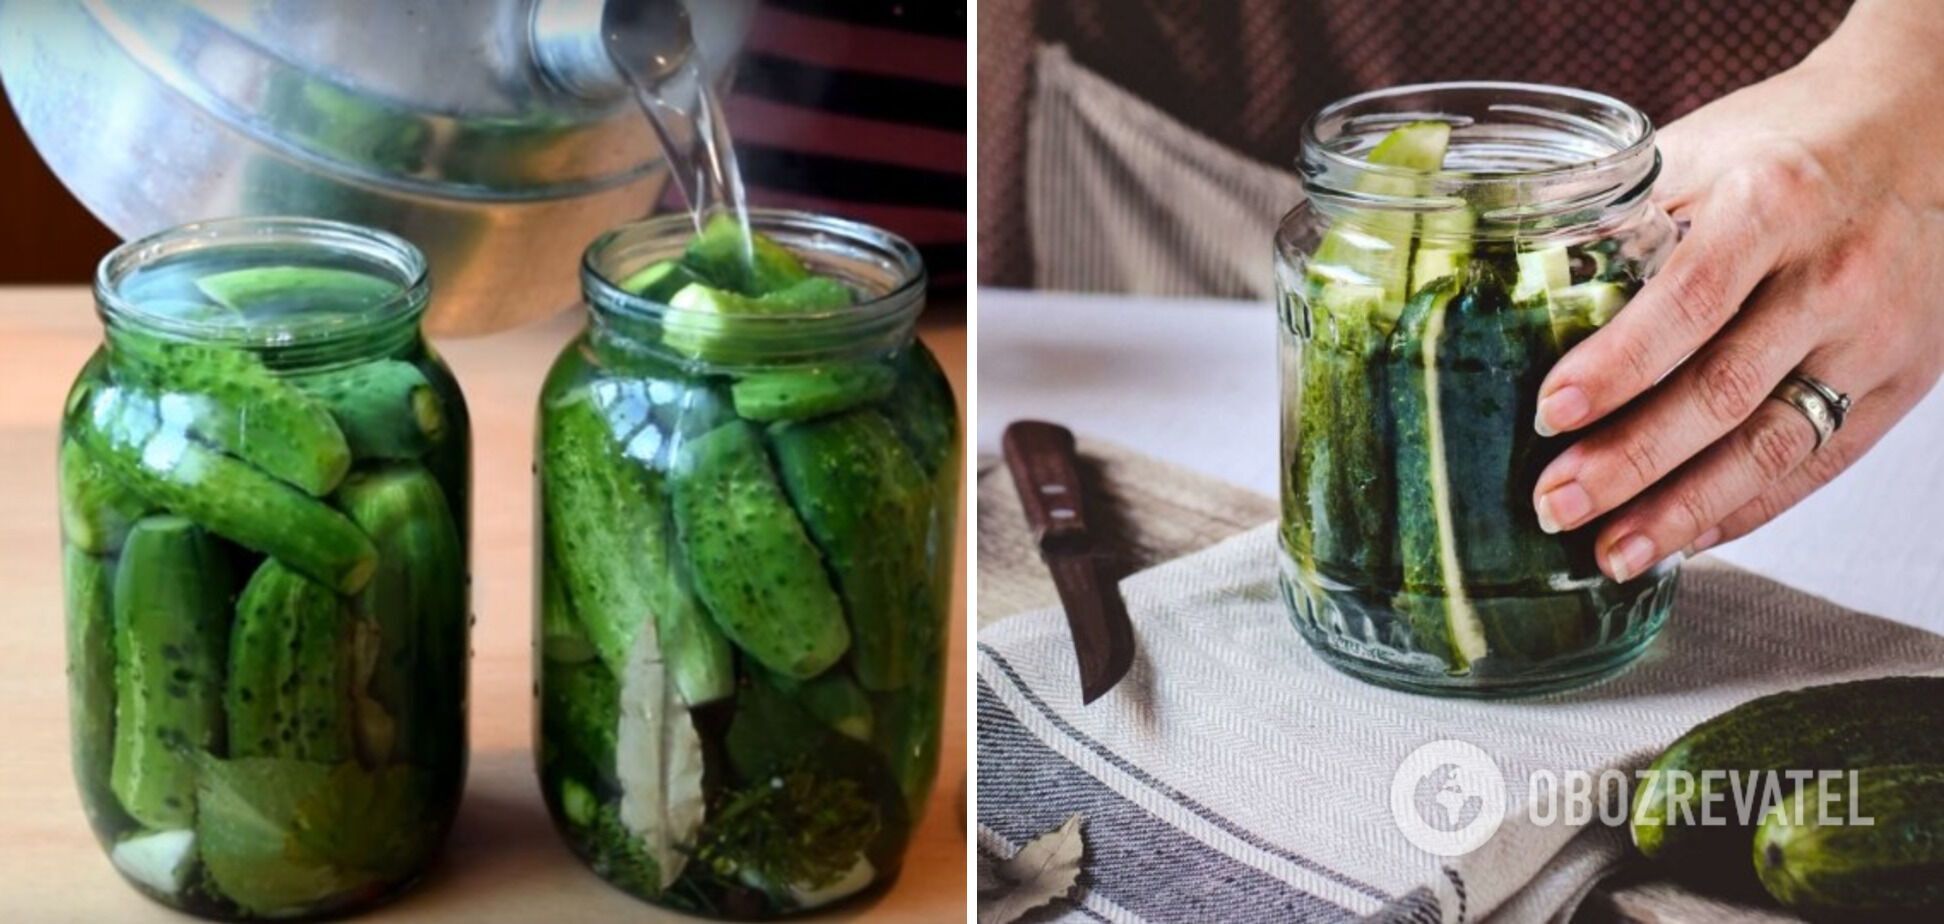 Why canned cucumbers get soft: there are many reasons why